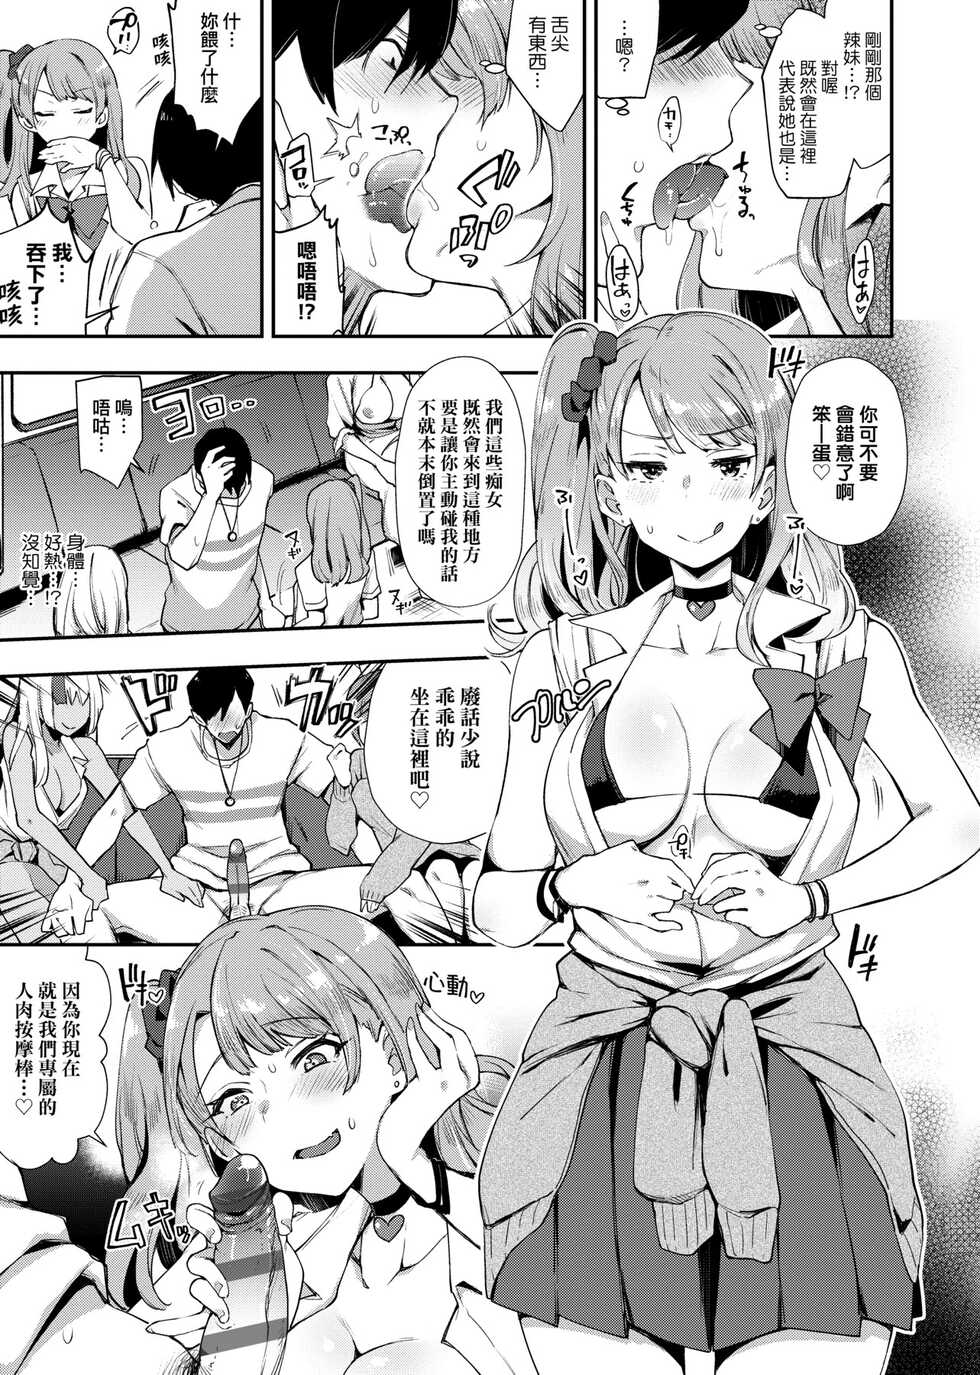 [Indo Curry] BITCH ONLY | 痴女專用車＜Bitch Only＞ 特裝版 [Chinese] [Digital] - Page 16